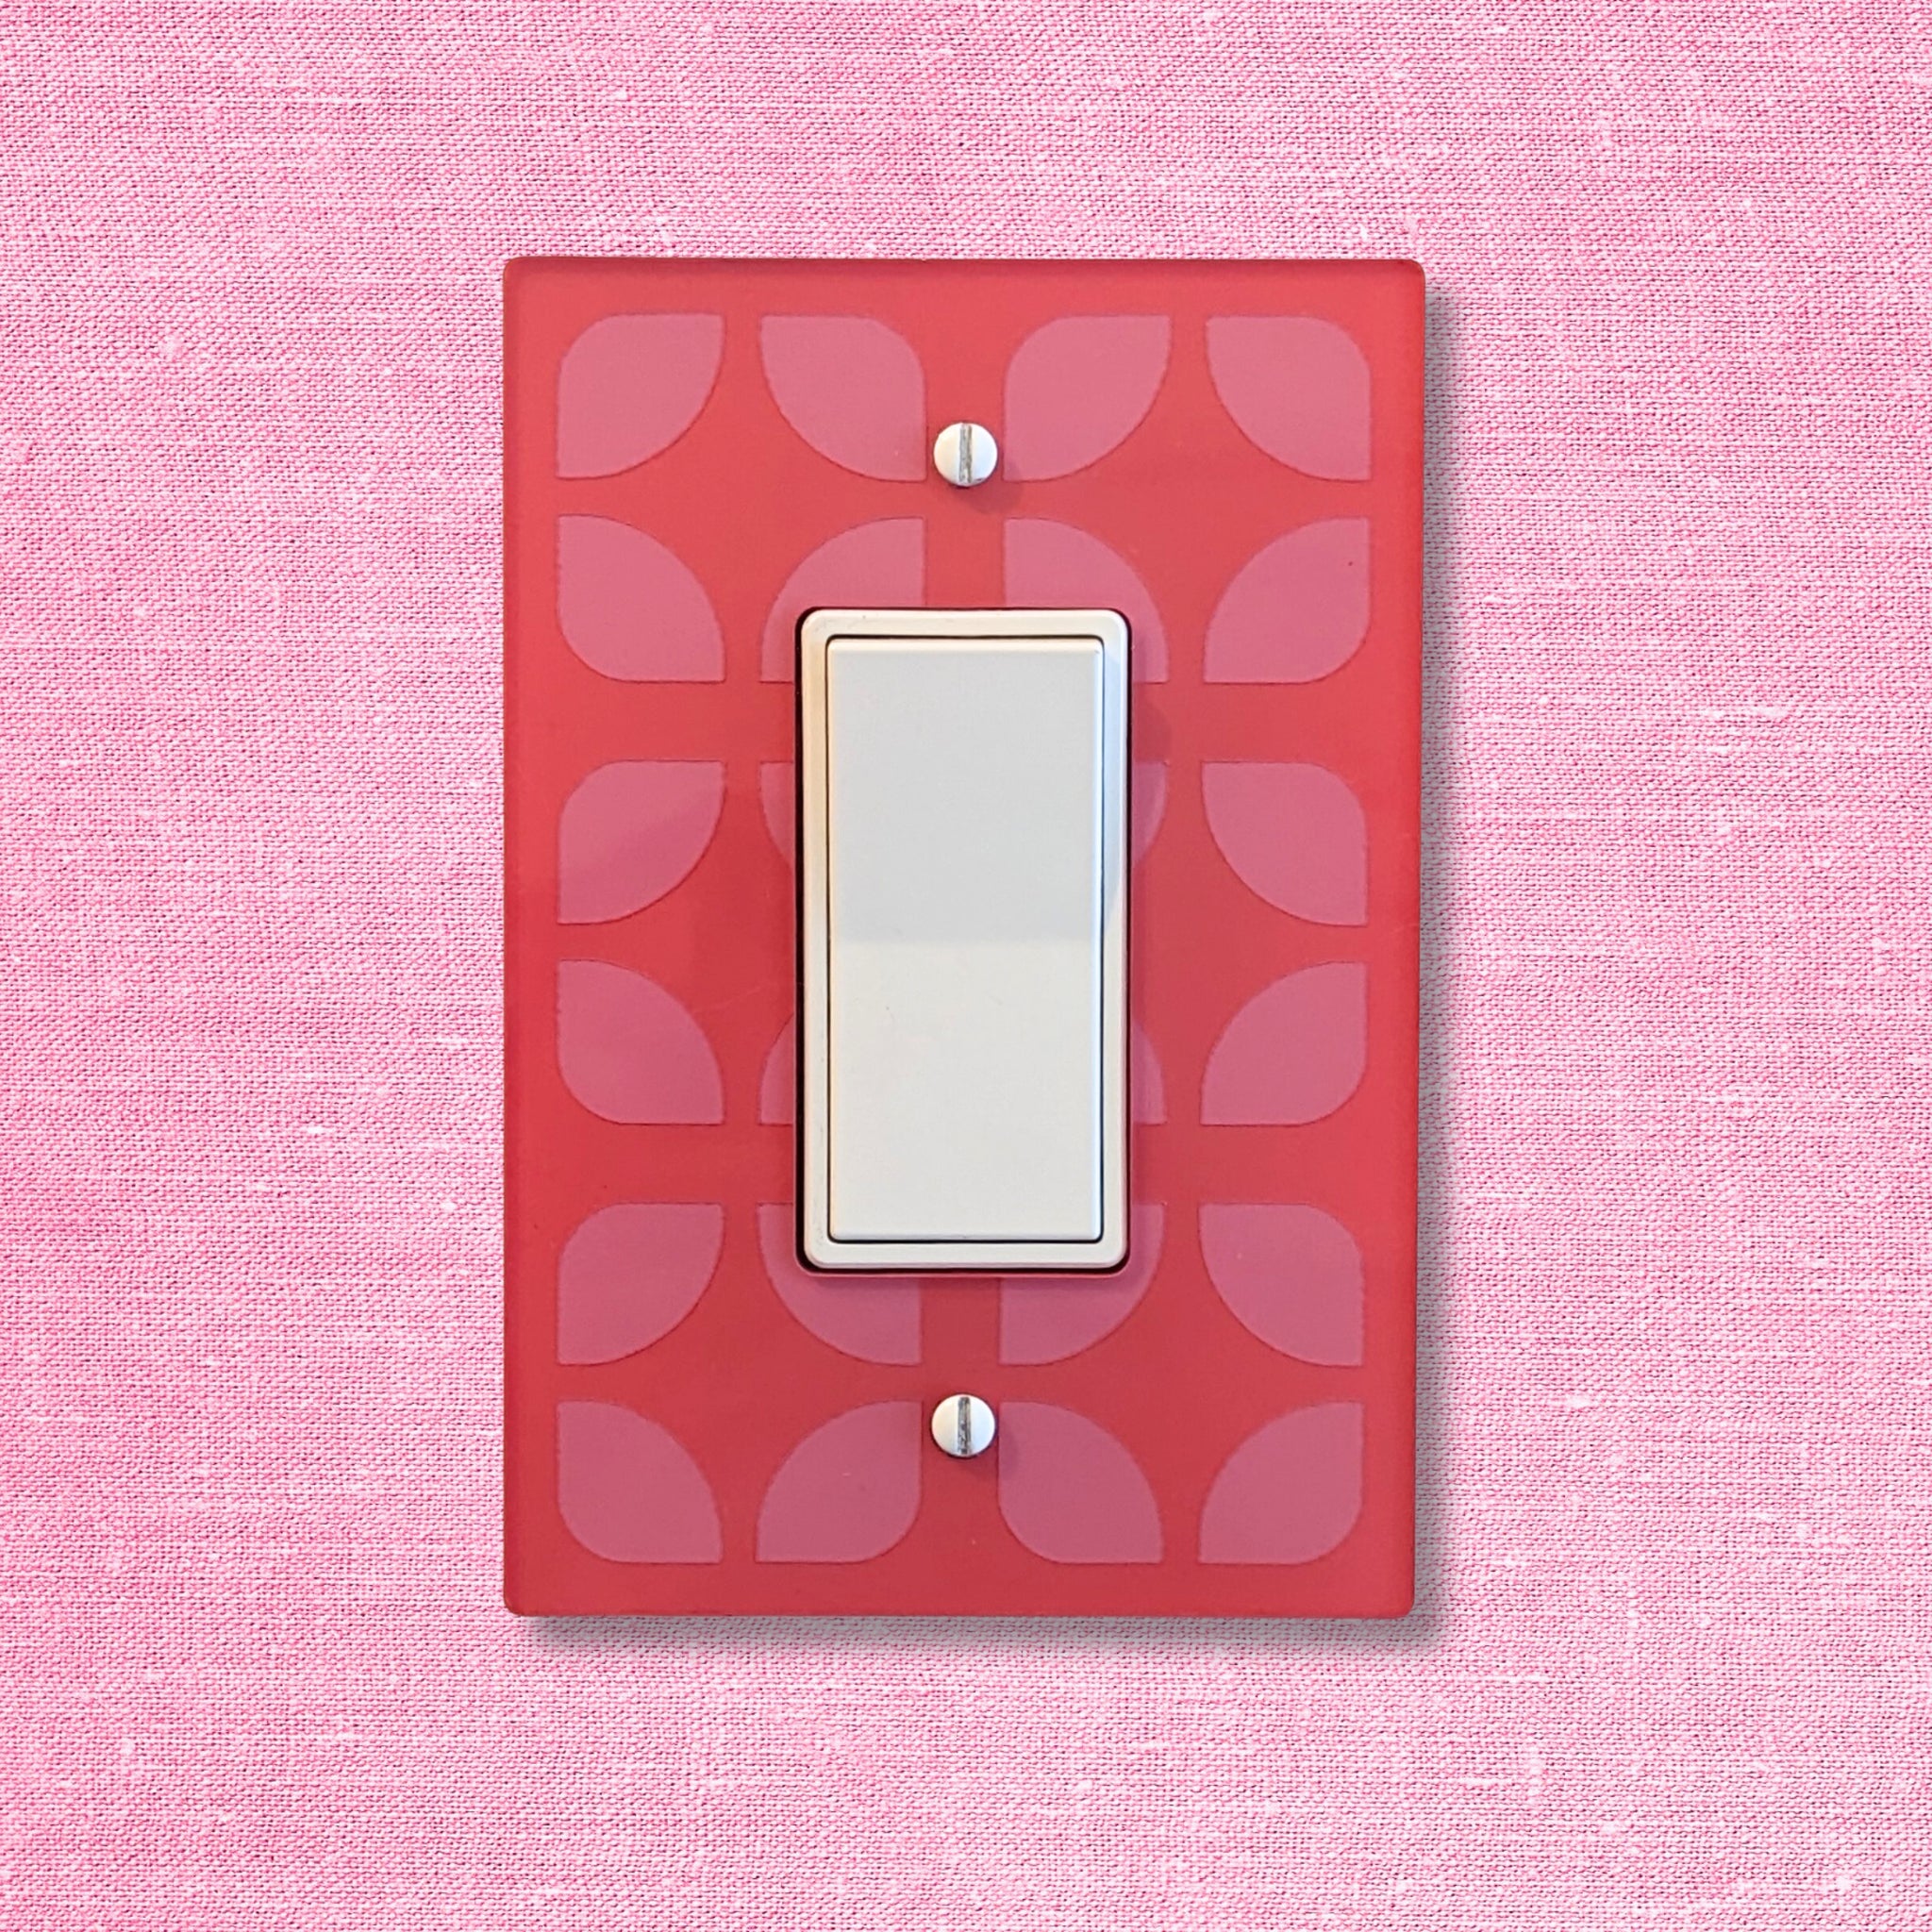 Breeze Block Switch Plate Cover - Pattern D